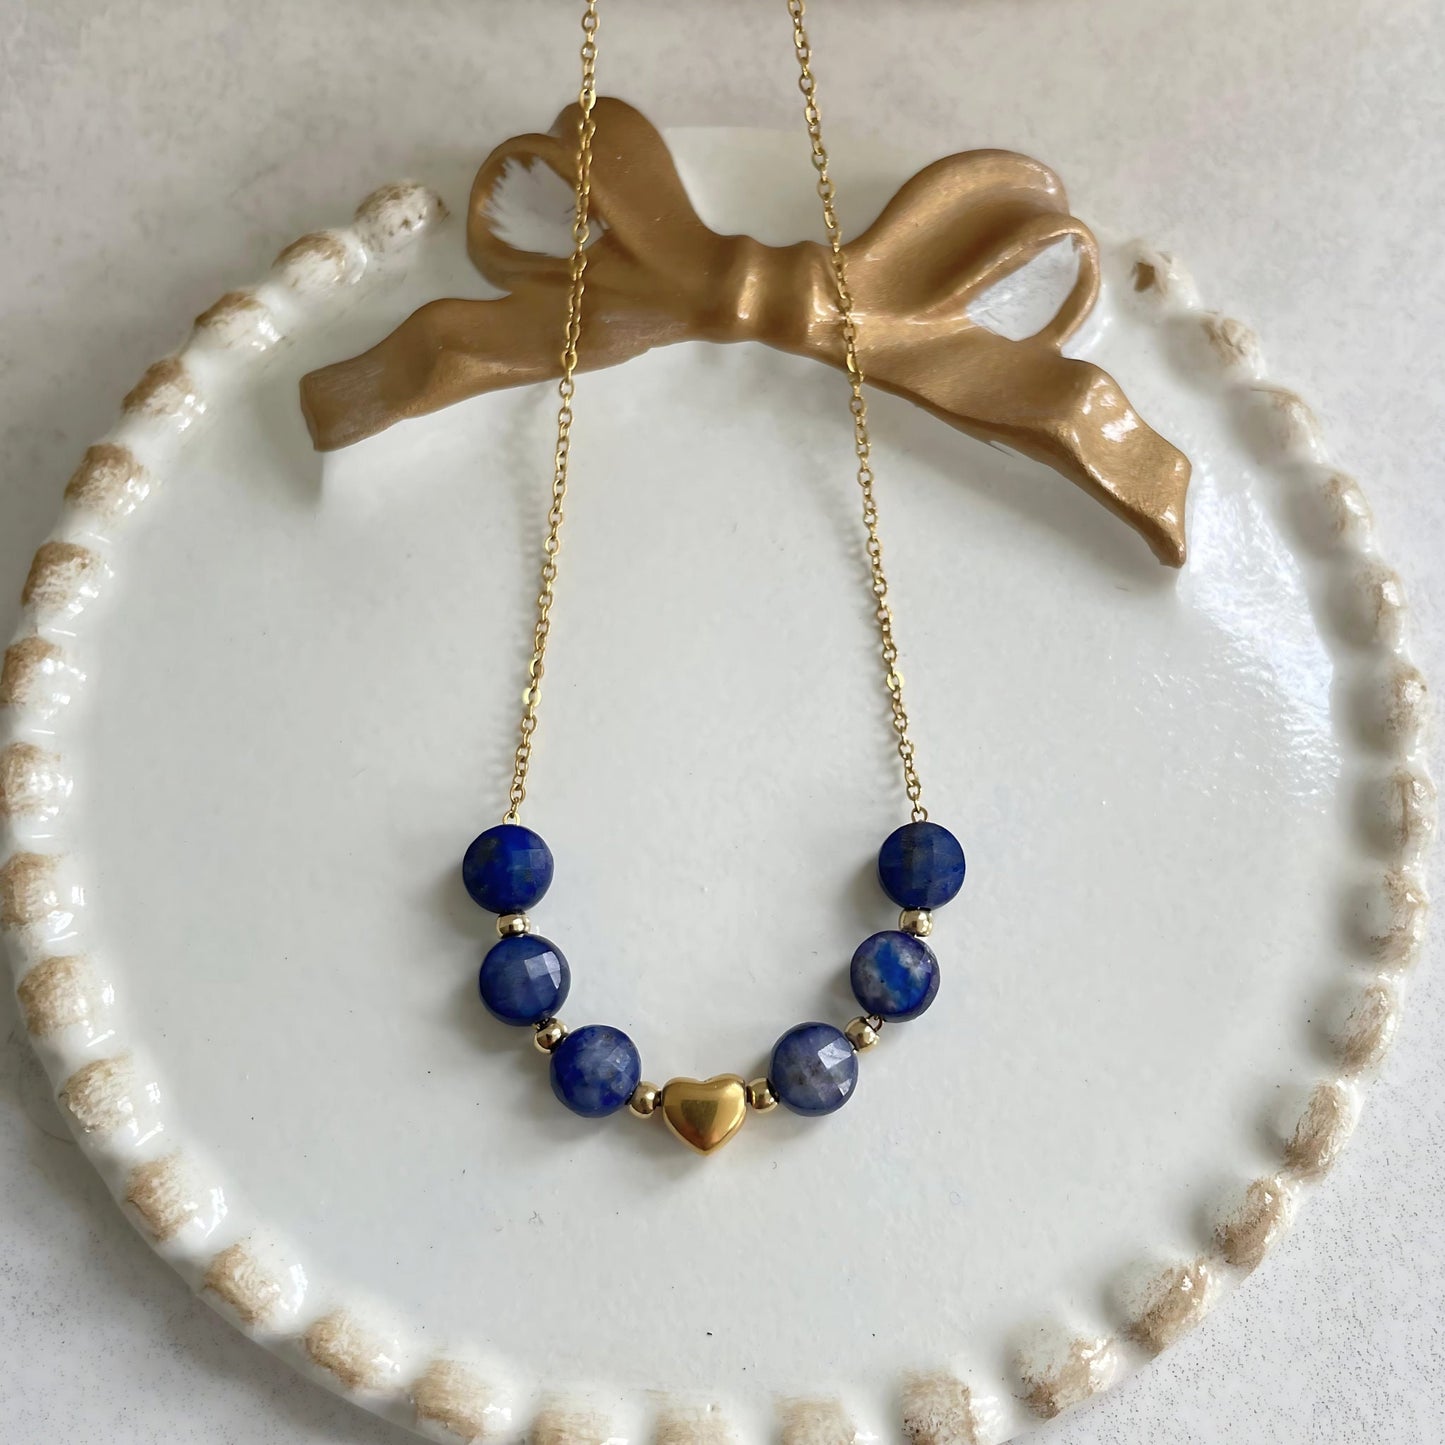 Dainty Blue Lapis Gemstone Tiny Heart Charm Necklace - Bohemian Natural Stone Beaded Gold Heart Pendant Necklace -Cute Navy Layered Necklace